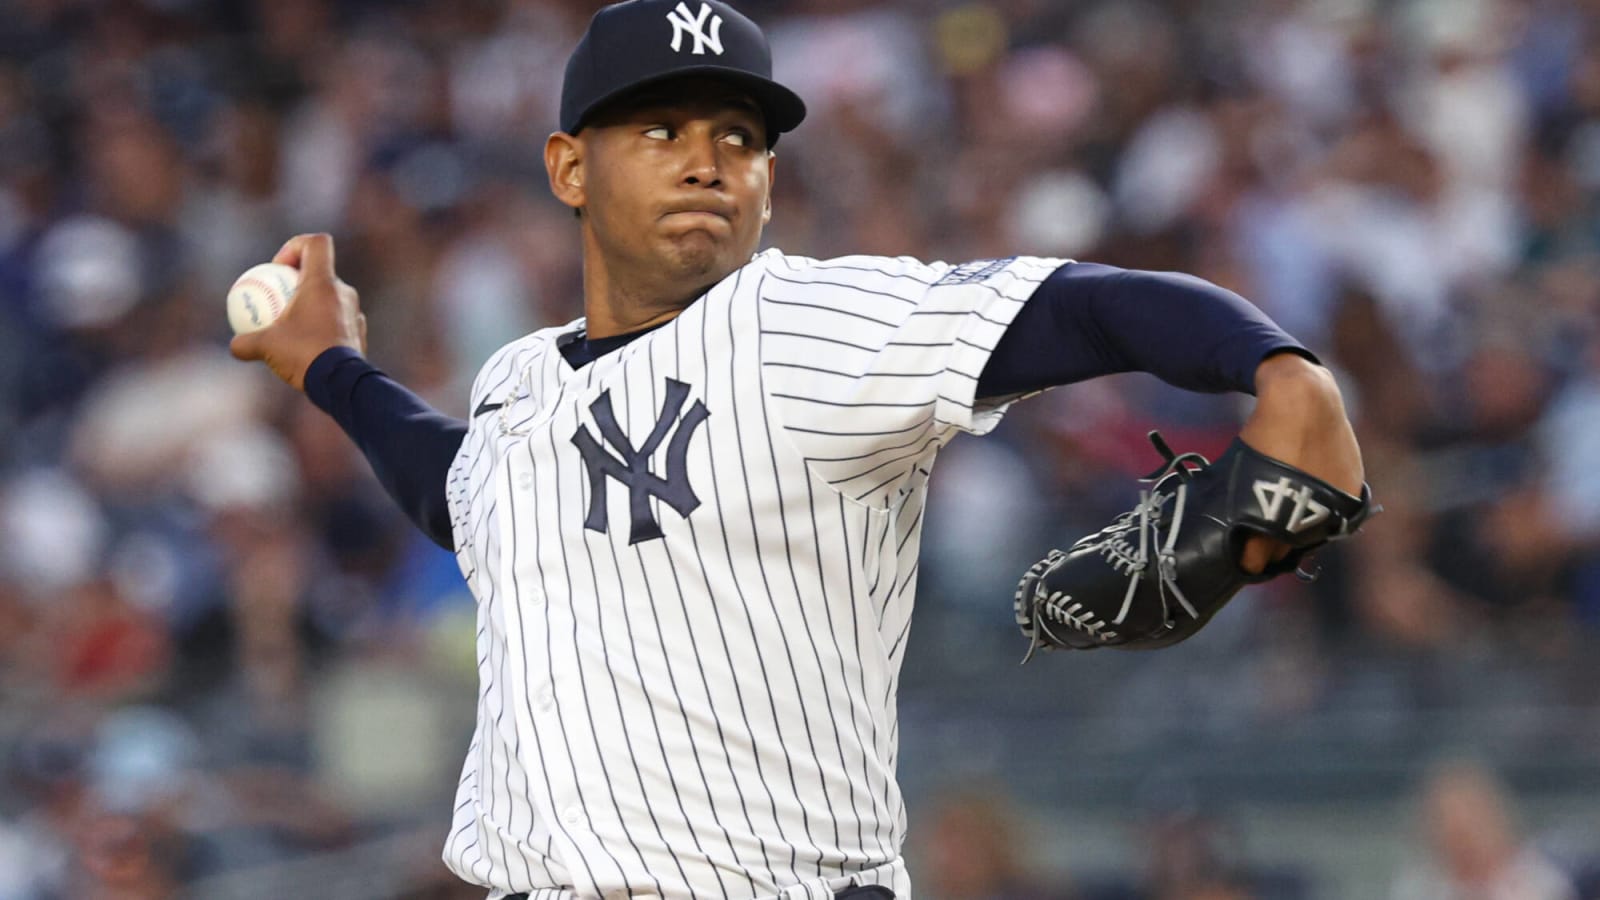 Yankees may have something special in young starting pitcher